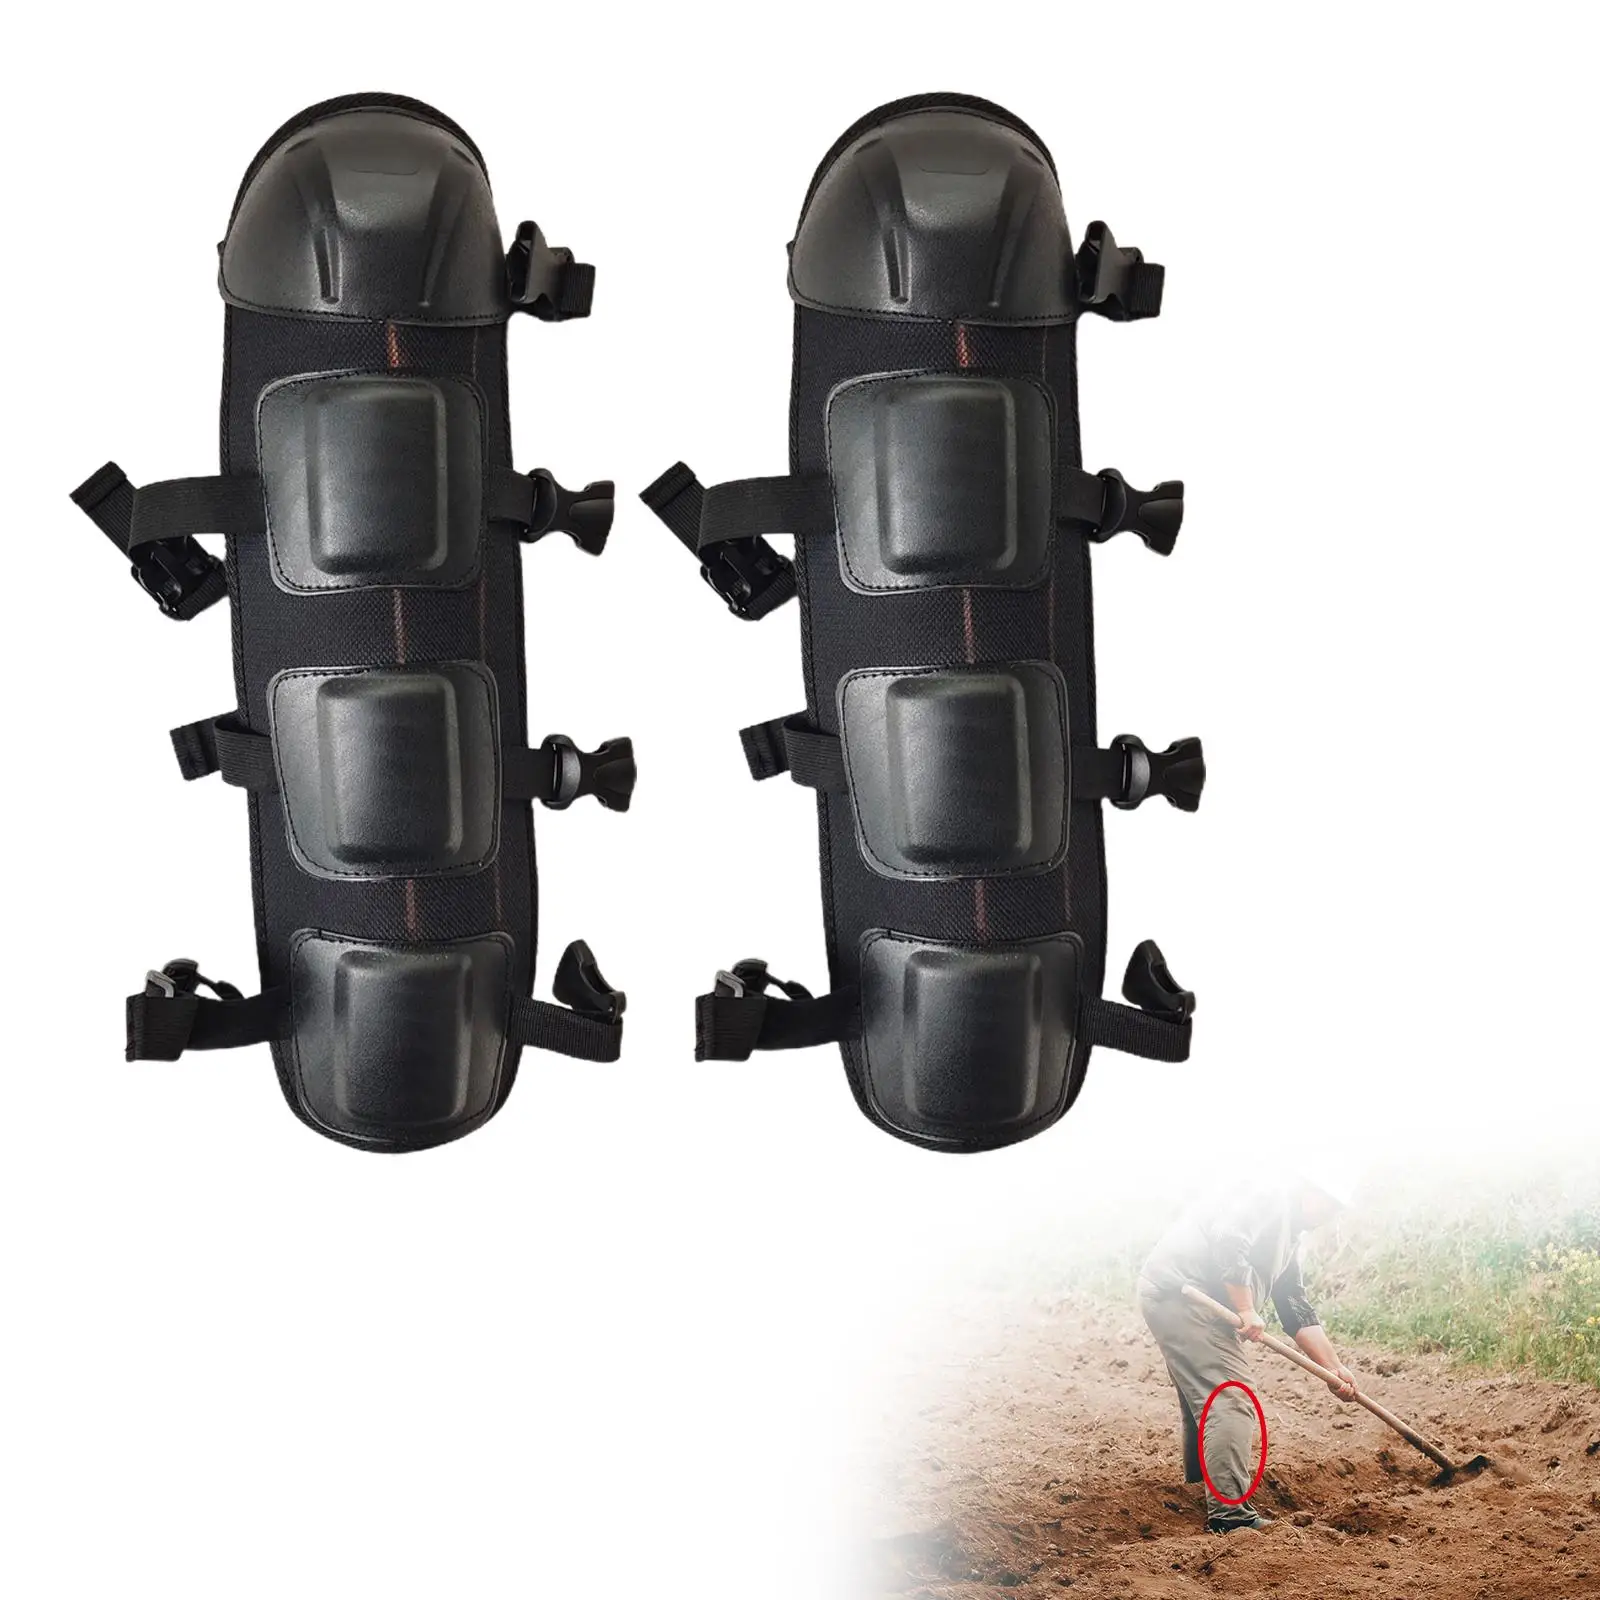 Work Knee Pads Kneelet Protective Gear Soft Leg Protector Chain Saw Shin Guards for Mountain Bikes Gardening Riding